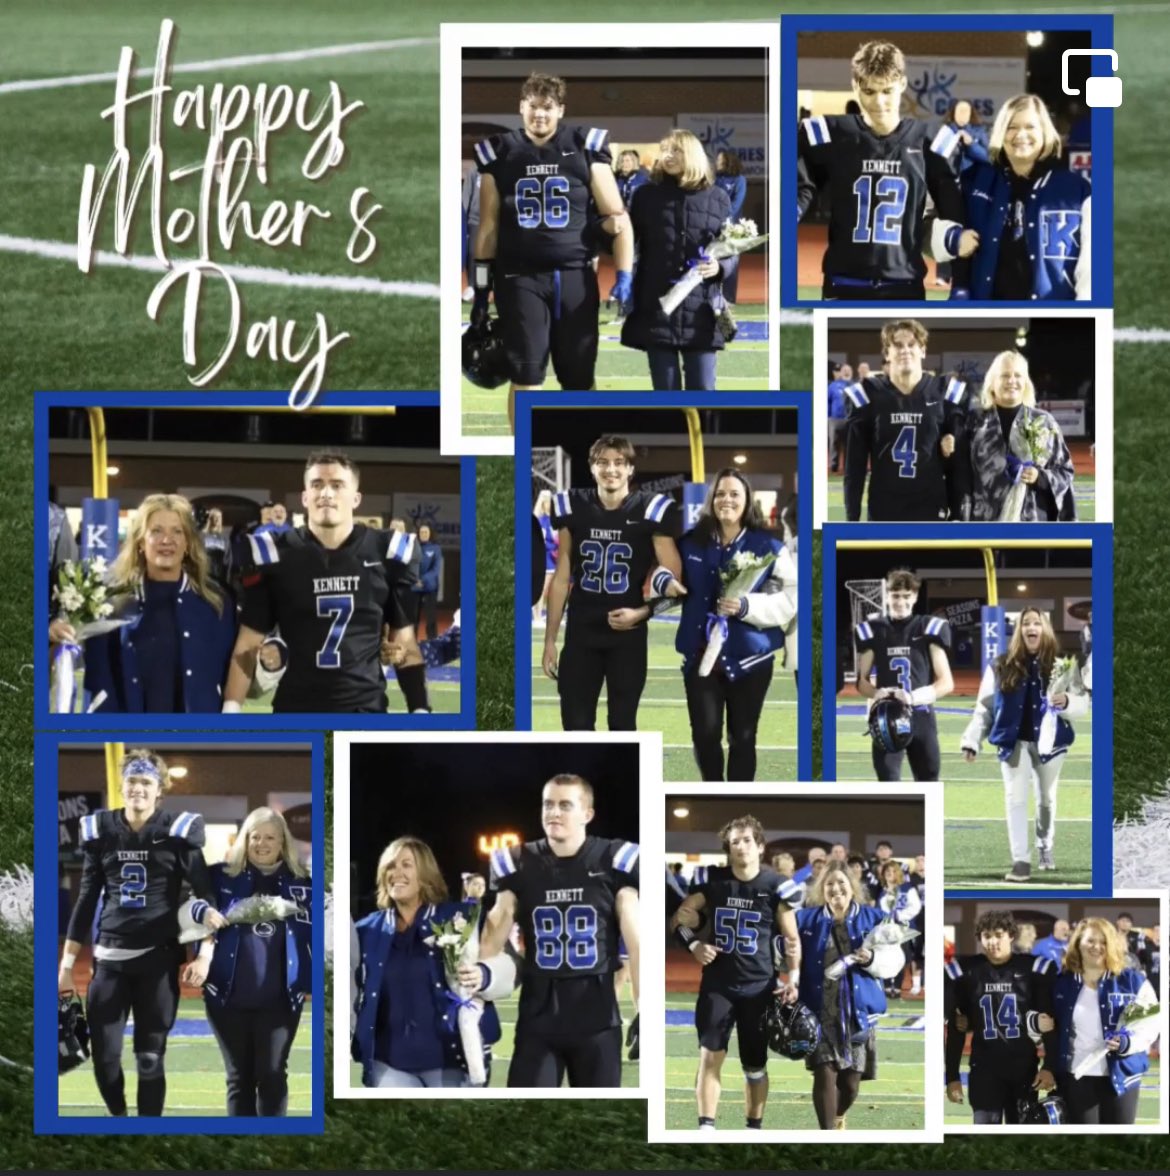 Happy Mother’s Day to all our incredible Kennett Blue Demons football moms! THANK YOU for all the hard work, dedication, and support you provide to our football players and program! Happy Mother’s Day!

#MothersDay #KennettHighSchool #FootballMoms #MomSupport #AthleteMoms